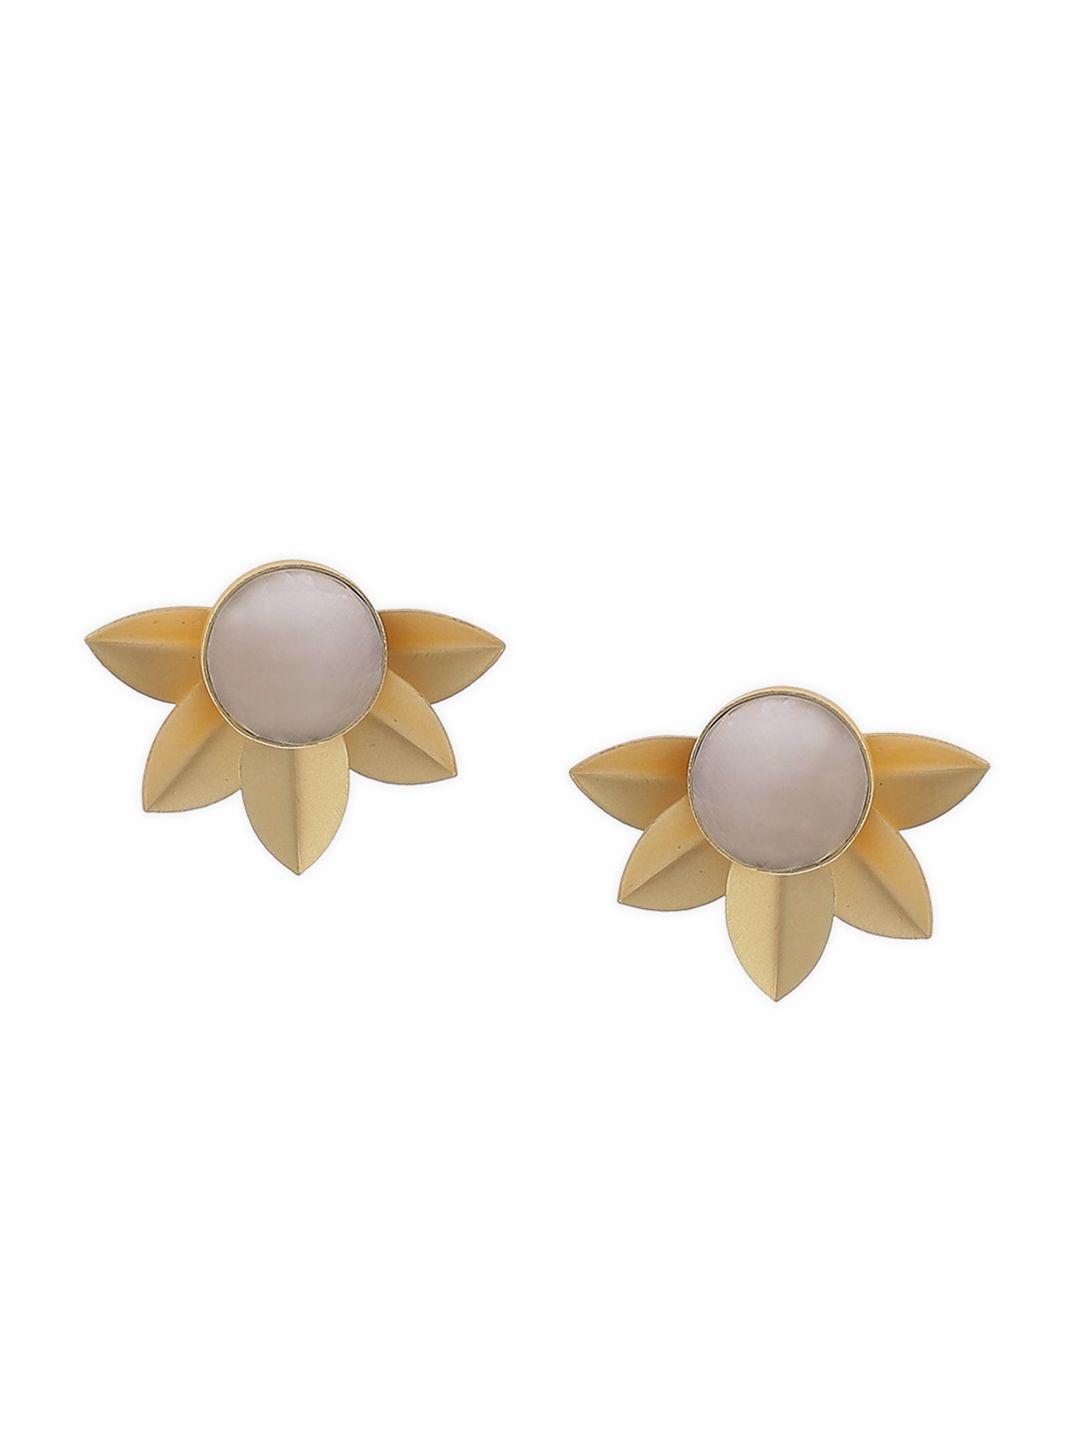 biba off white & gold-toned contemporary studs earrings